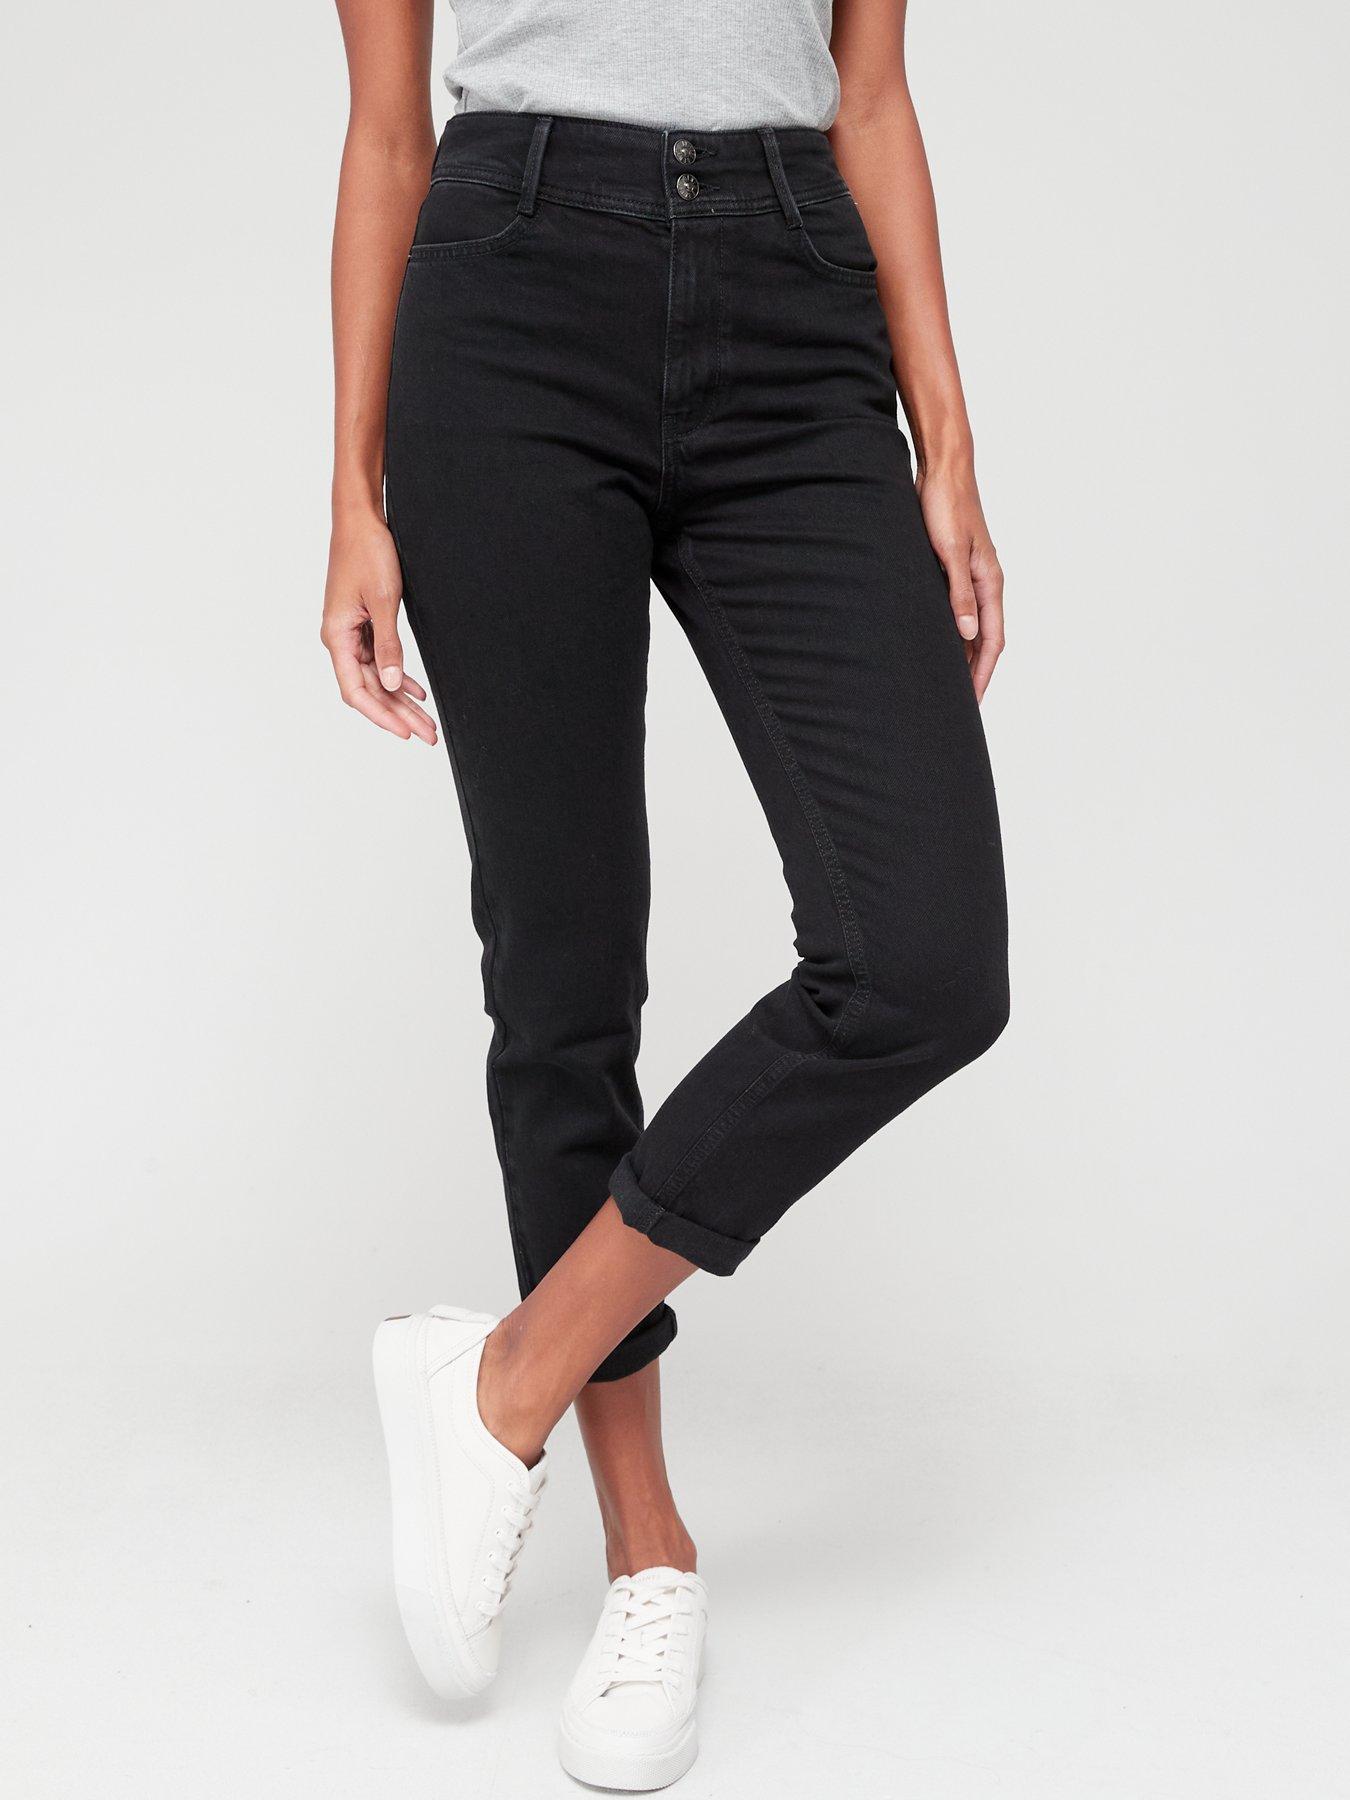 Coated Jeans, V by very, Jeans, Women